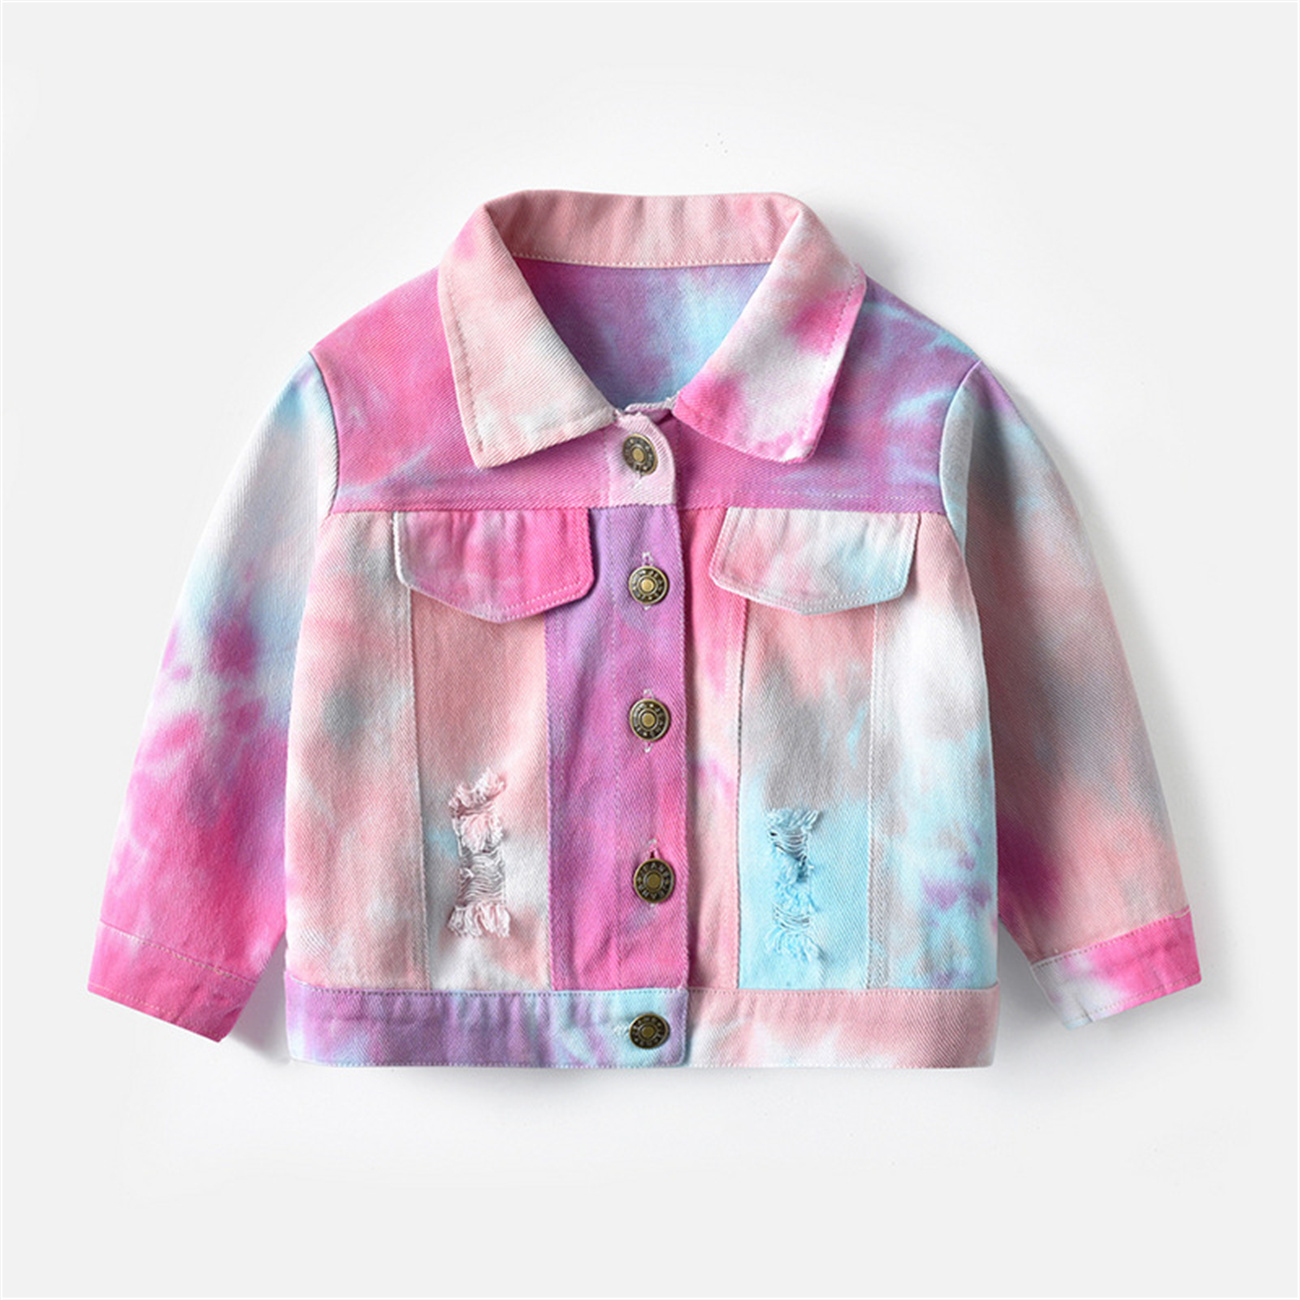 Toddler Tie-dye Denim Jean Jacket for Girls Boys Size 1-7T Single-breasted Mid-length Jacket for Spring Fall,Pink,5-6 Years - image 1 of 7